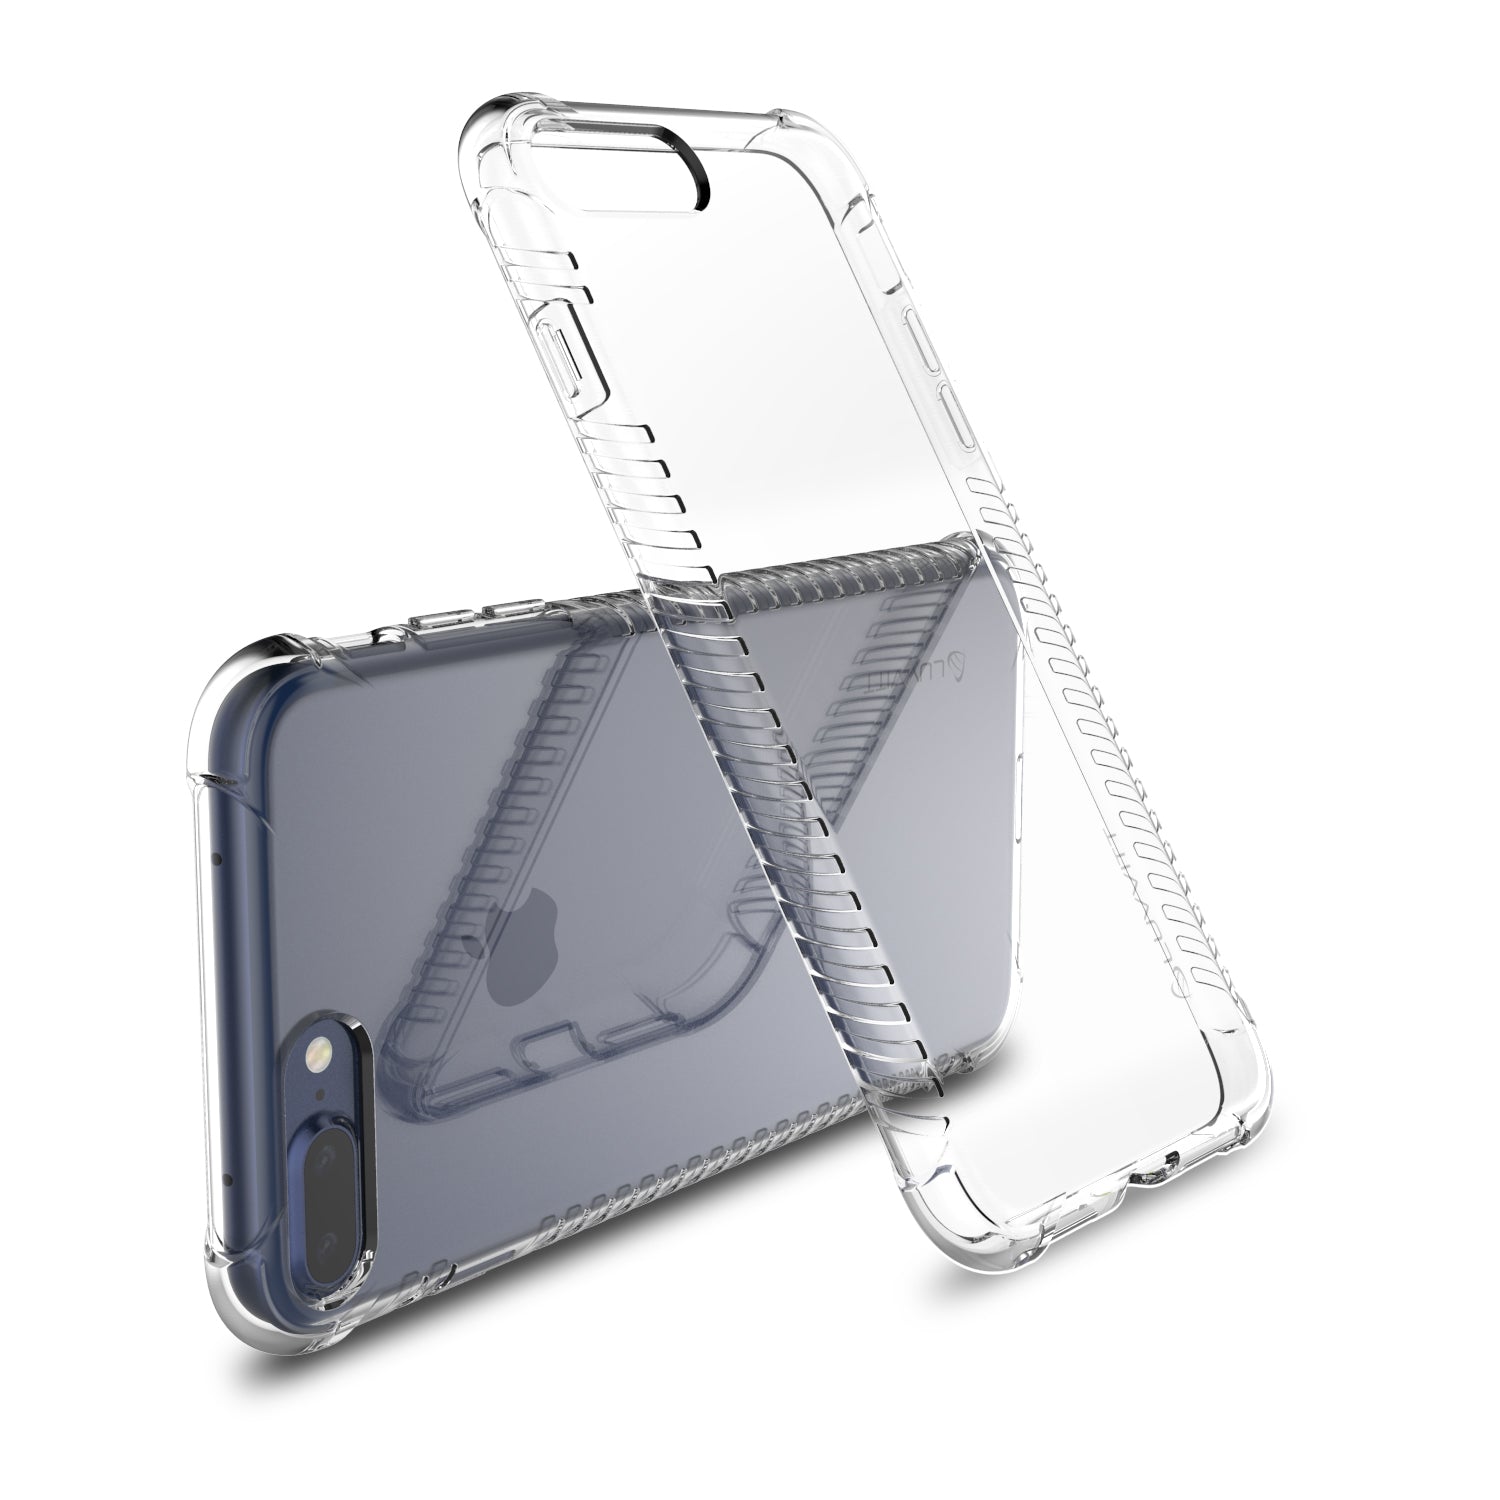 Luvvitt Clear Grip Case for iPhone 8 Plus - Crystal Clear